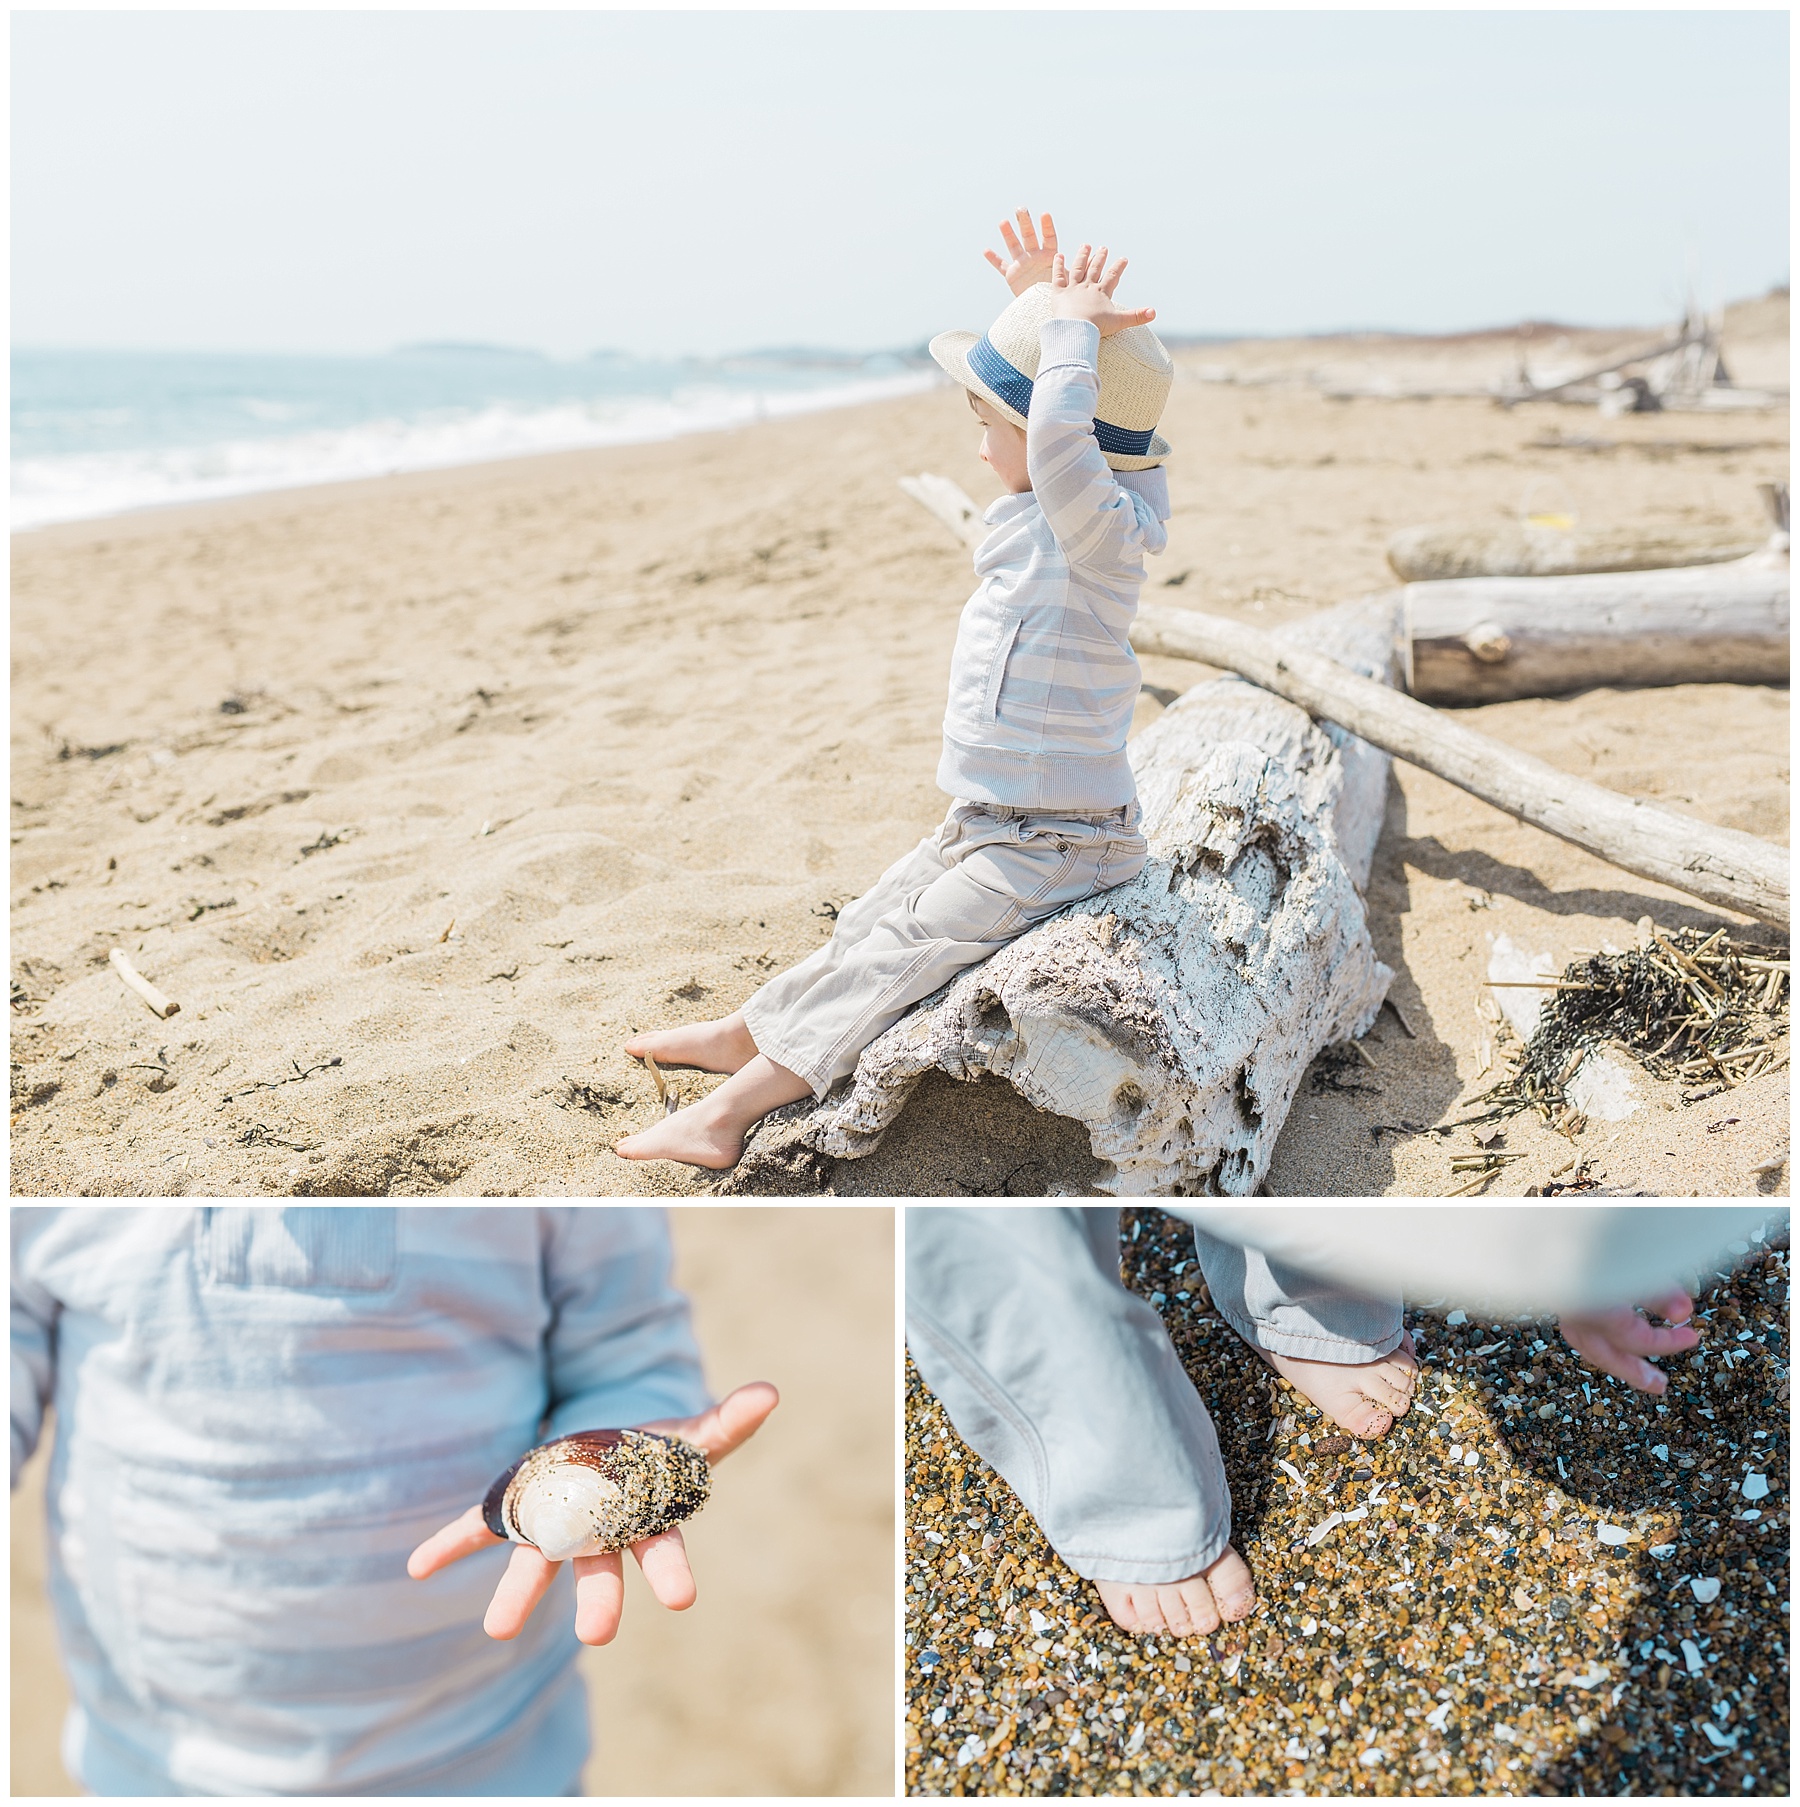 fashionable boy and girl toddler portrait session at the beach at reid state park in georgetown, maine, children's portrait photographer